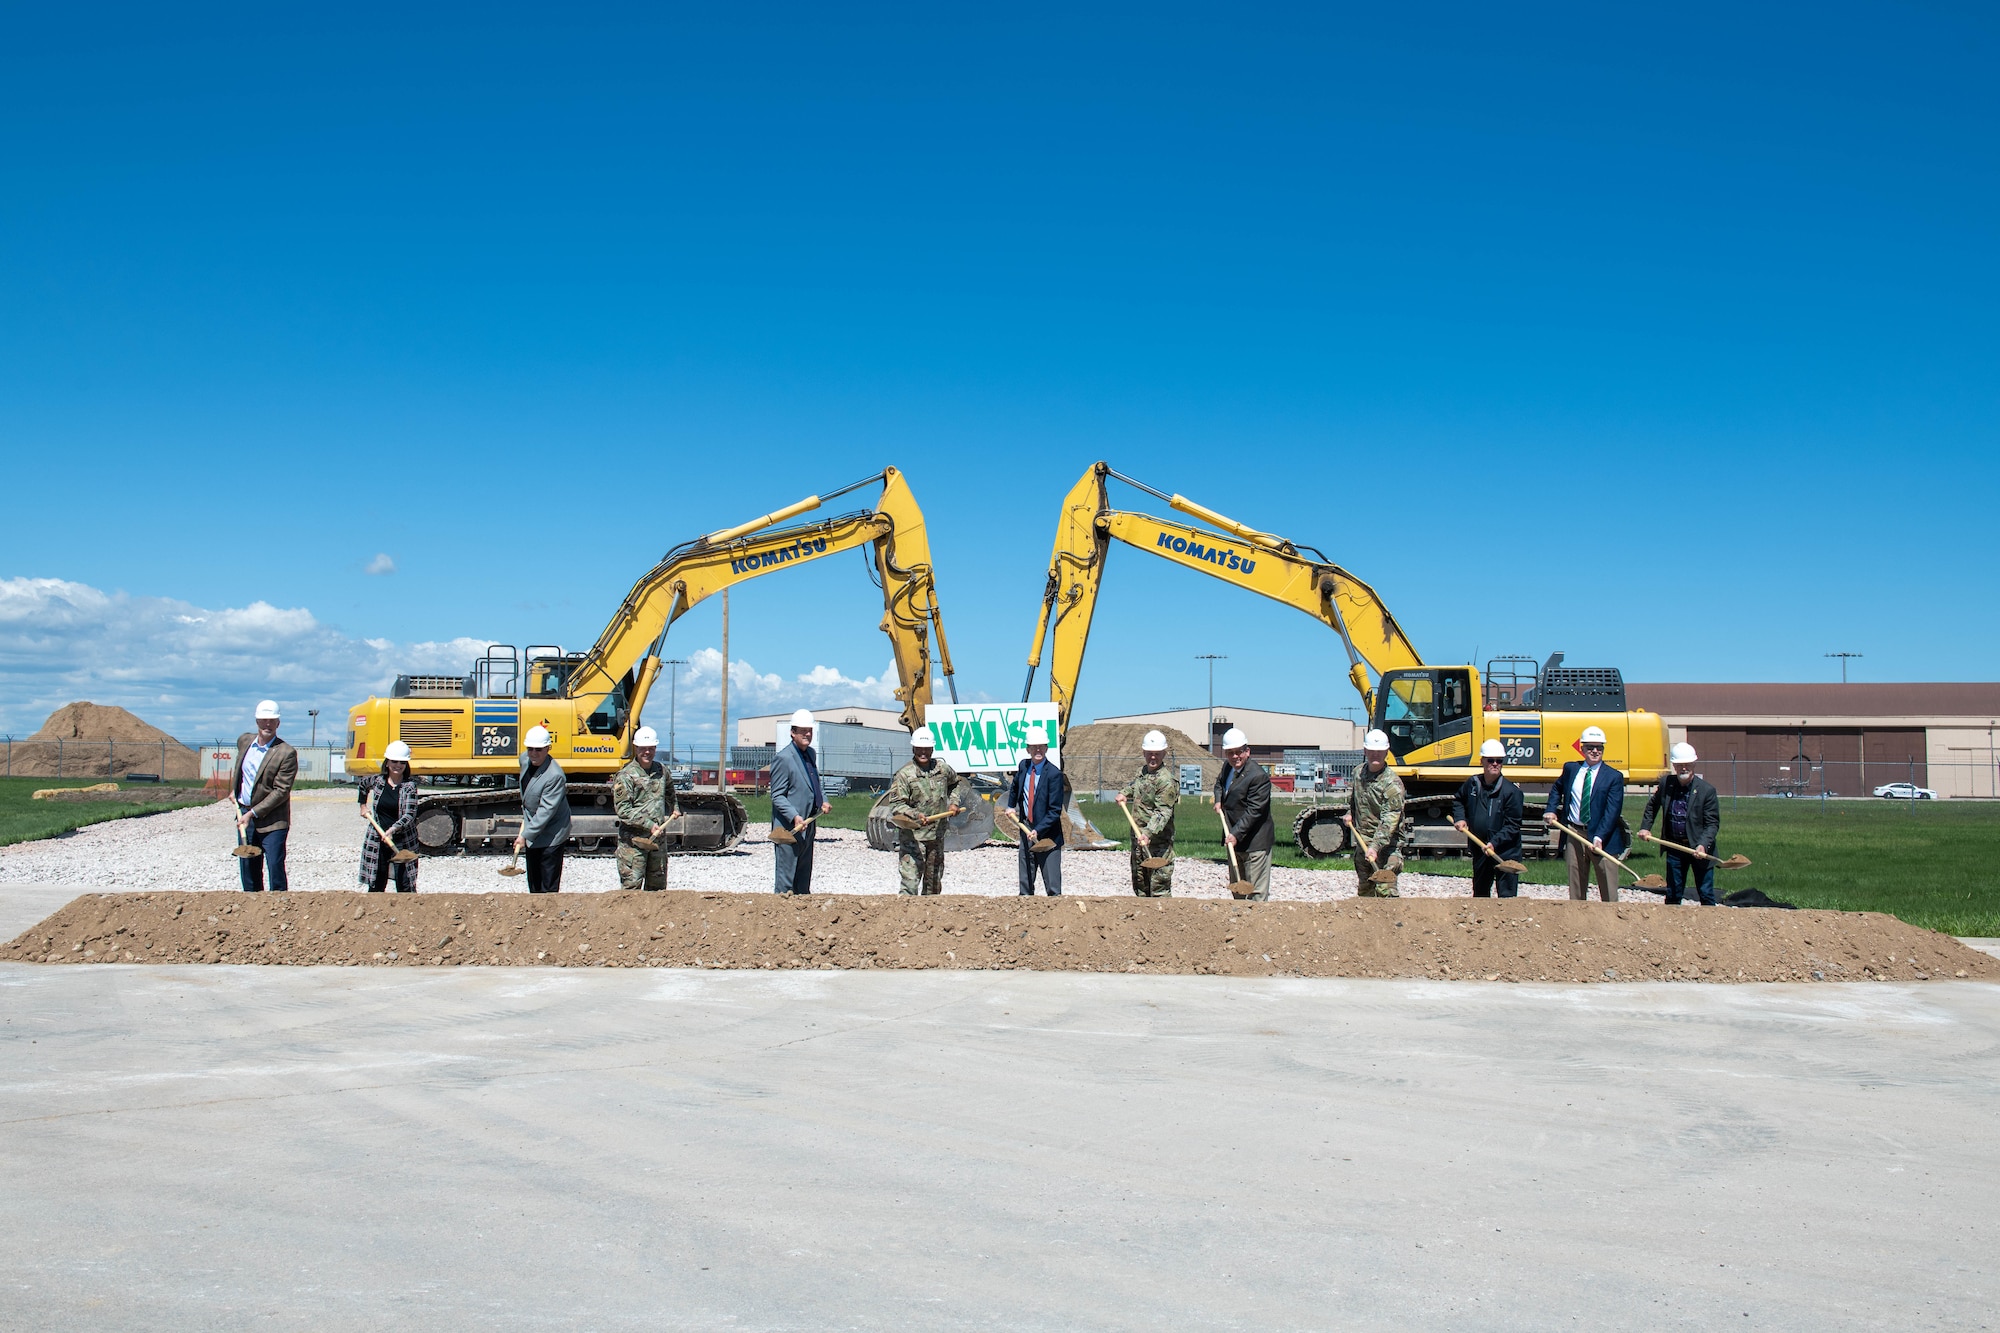 Gen. Anthony Cotton, Air Force Global Strike Command commander, stands with base and civic leaders at the B-21 Groundbreaking ceremony on Ellsworth Air Force Base, S.D., May 25, 2022.